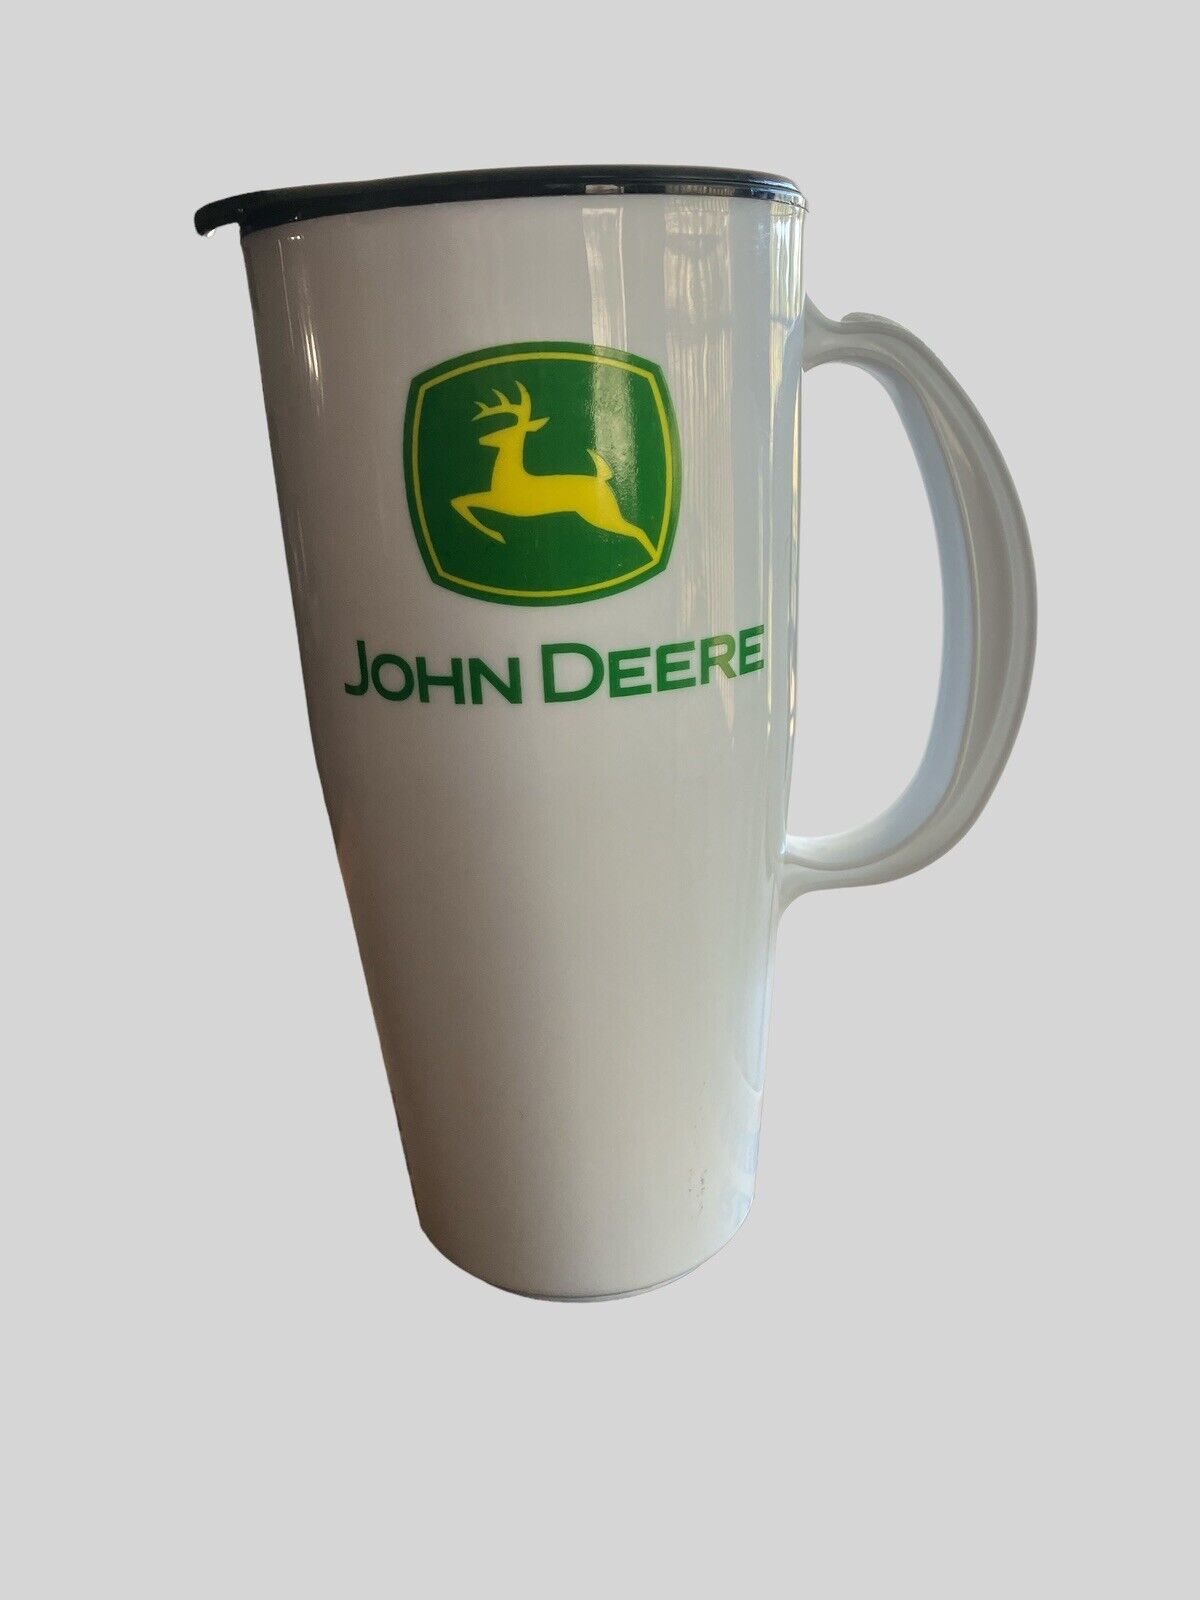 Large Vintage John Deere Insulated Travel Mug by Thermo-Serv Cup